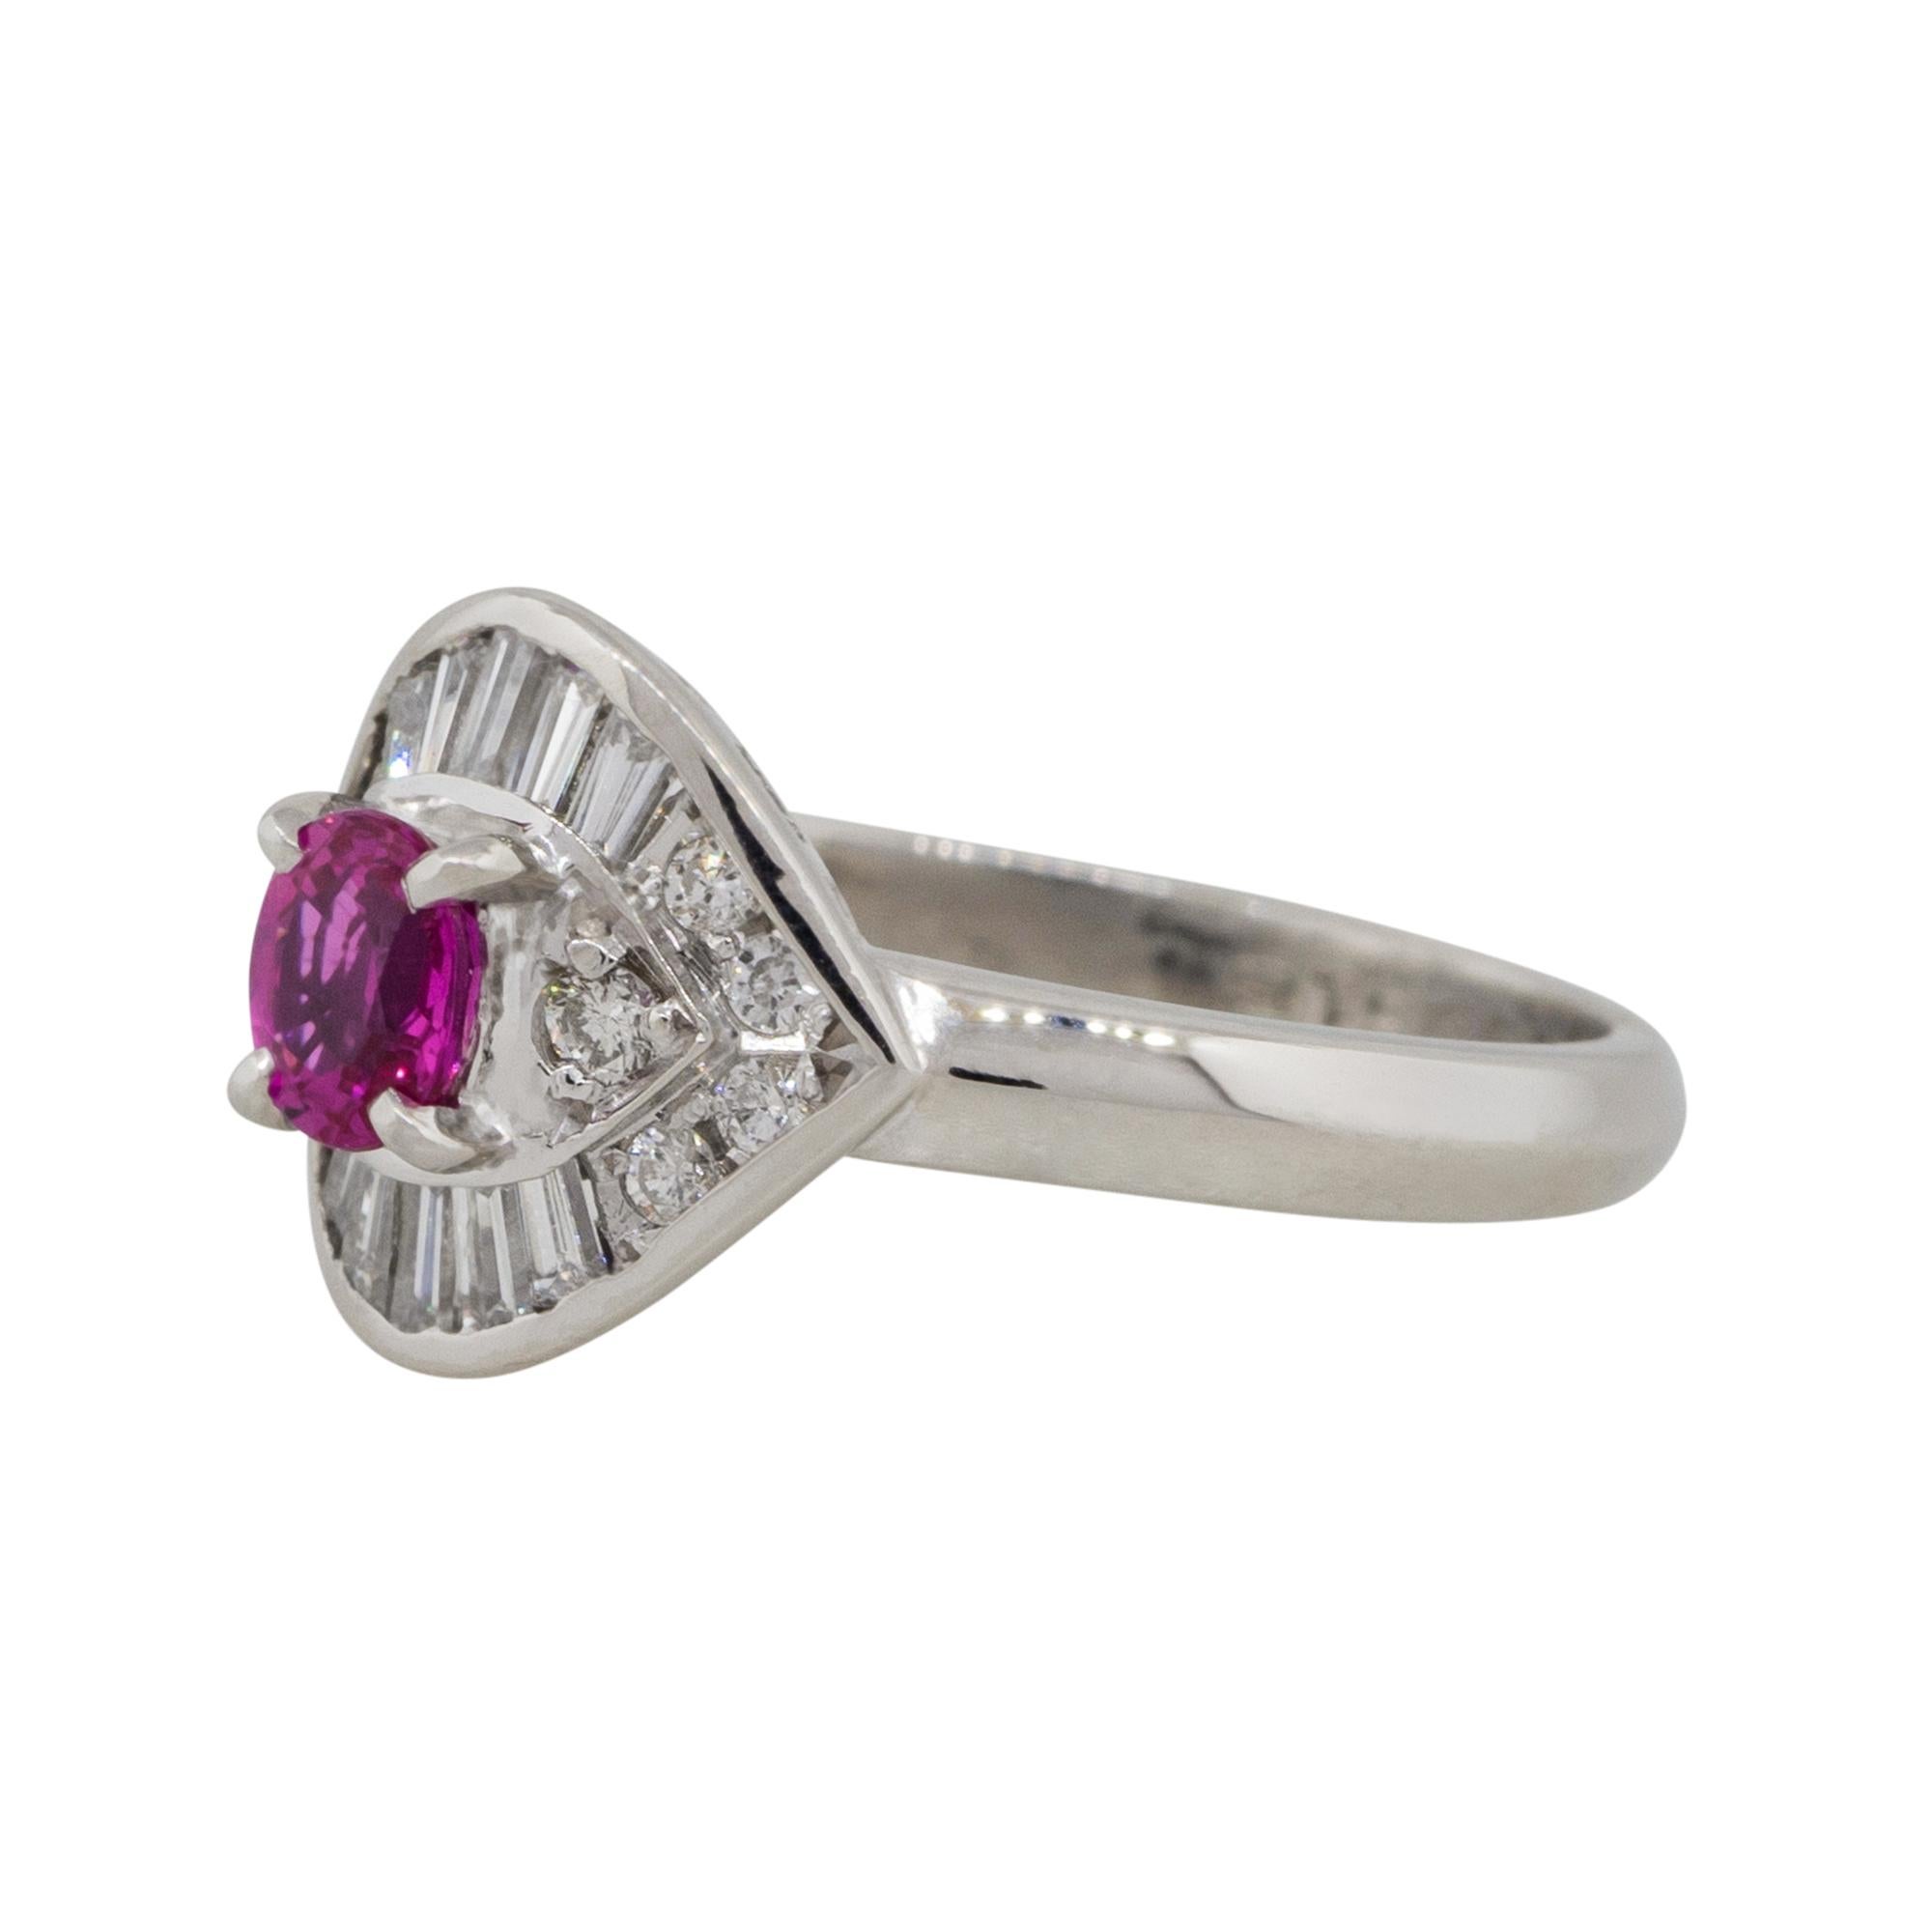 Material: Platinum
Gemstone details: Approx. 0.47ctw oval shaped Ruby gemstone
Diamond details: Approx. 0.45ctw of round cut Diamonds. Diamonds are G/H in color and VS in clarity
Ring Size: 6
Ring Measurements: 0.75